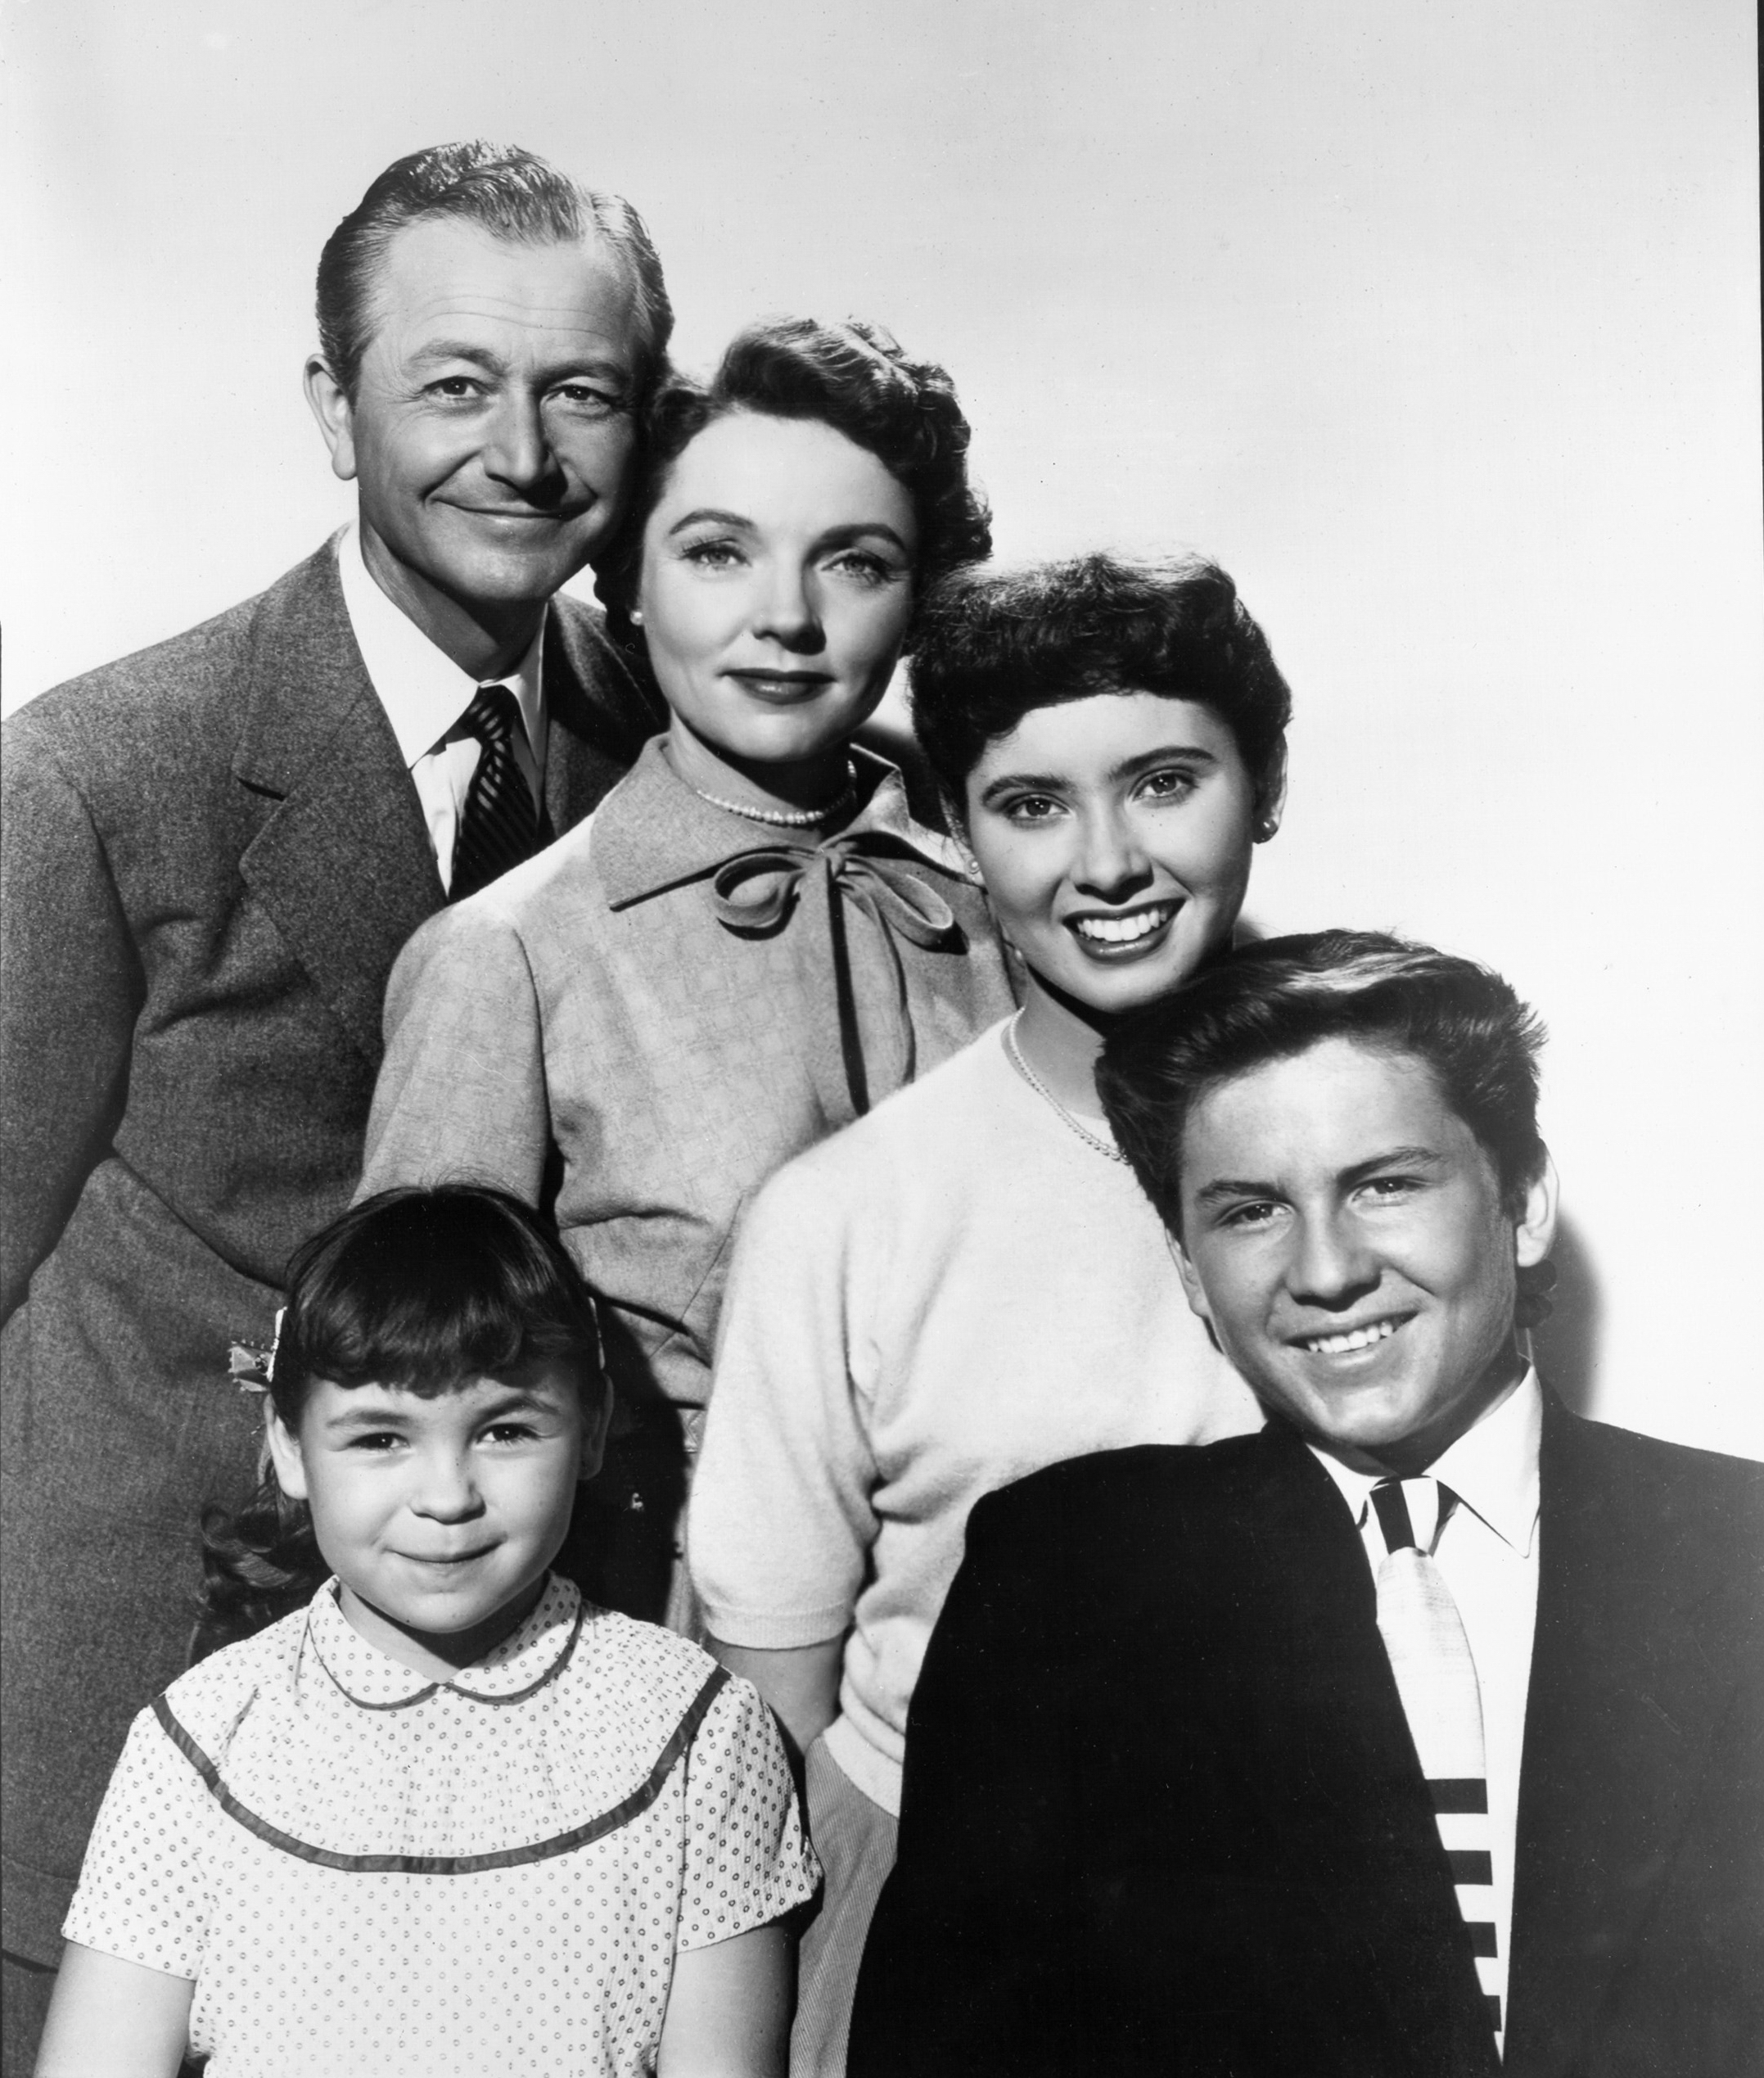 The cast of "Father Knows Best," Robert Young as Jim Anderson, Jane Wyatt as Margaret, Elinor Donahue as Betty, Billy Gray as James Jr. (Bud), and Lauren Chapin as Kathy "Kitten" Anderson on September 10, 1954 | Source: Getty Images